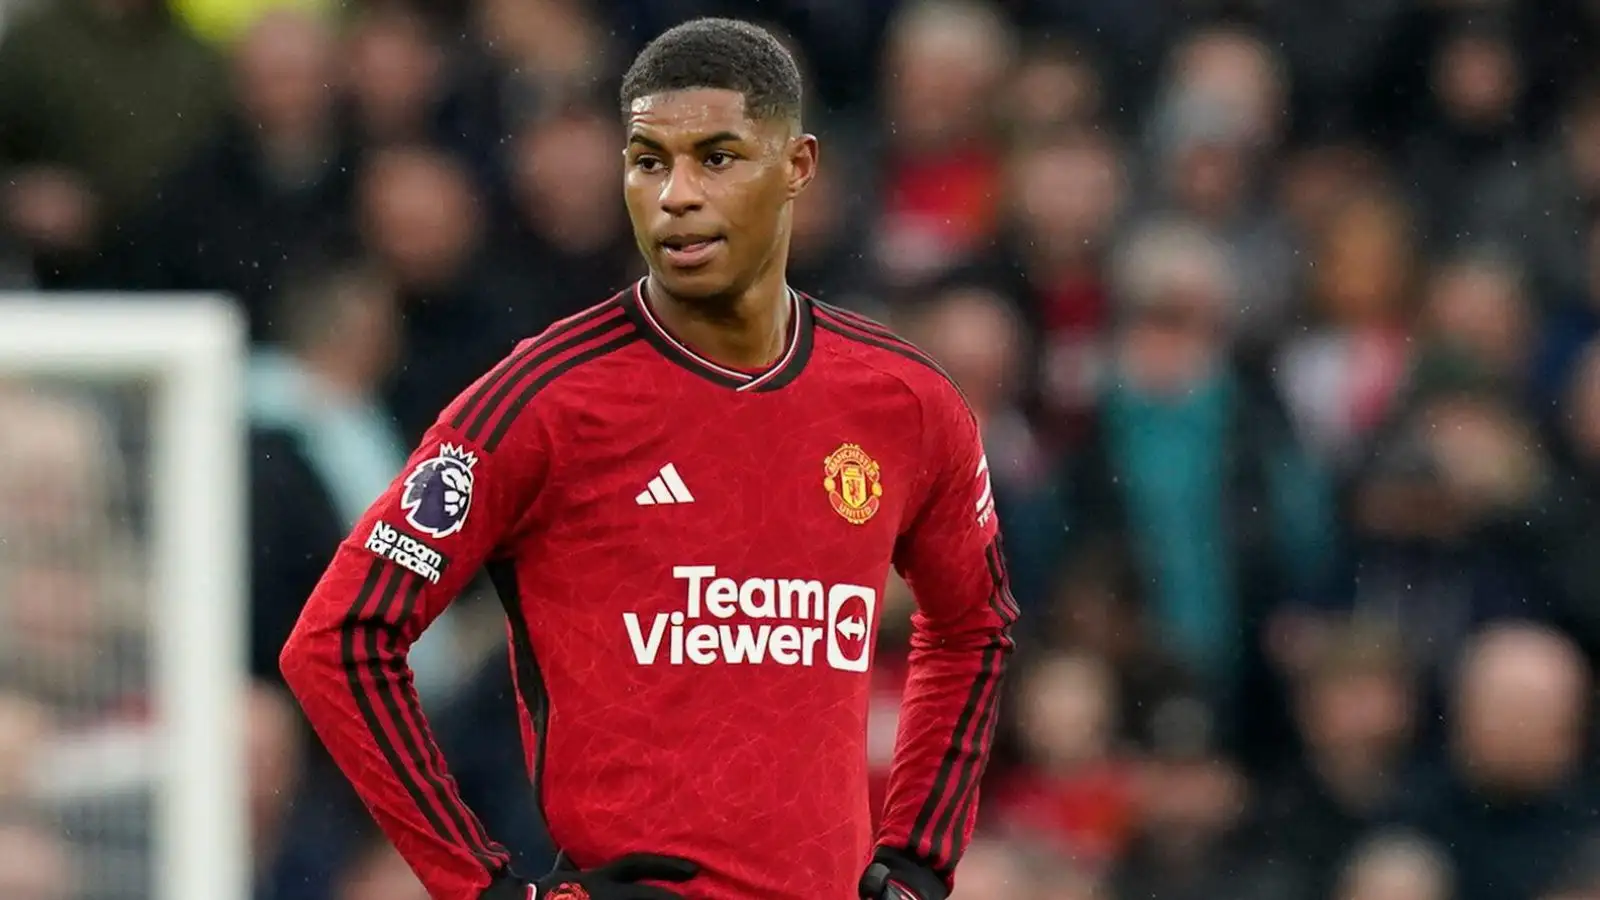 Marcus Rashford appearances dejected throughout a suited.